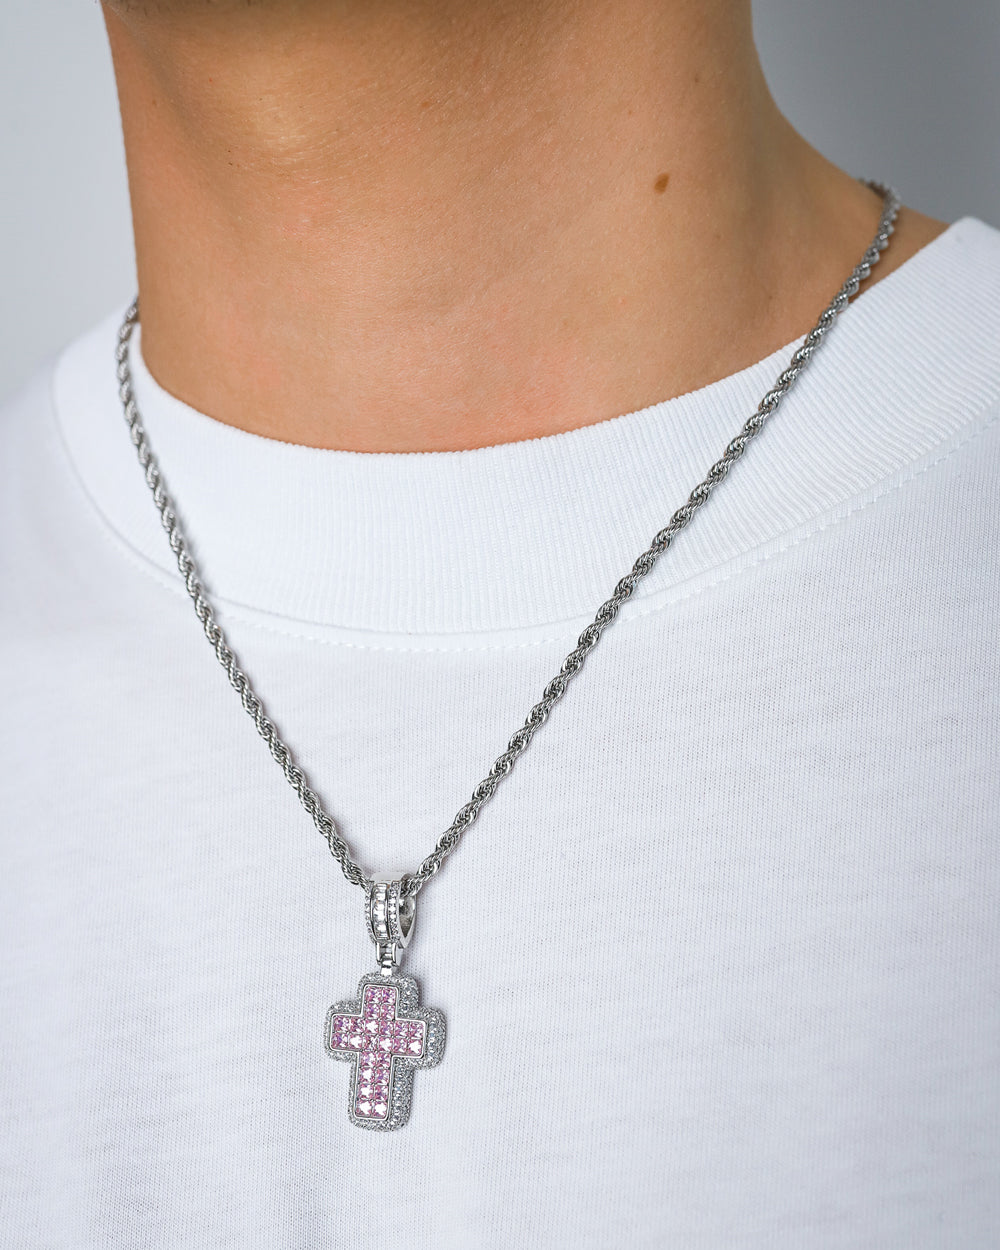 ICED PINK CROSS PENDANT. - WHITE GOLD